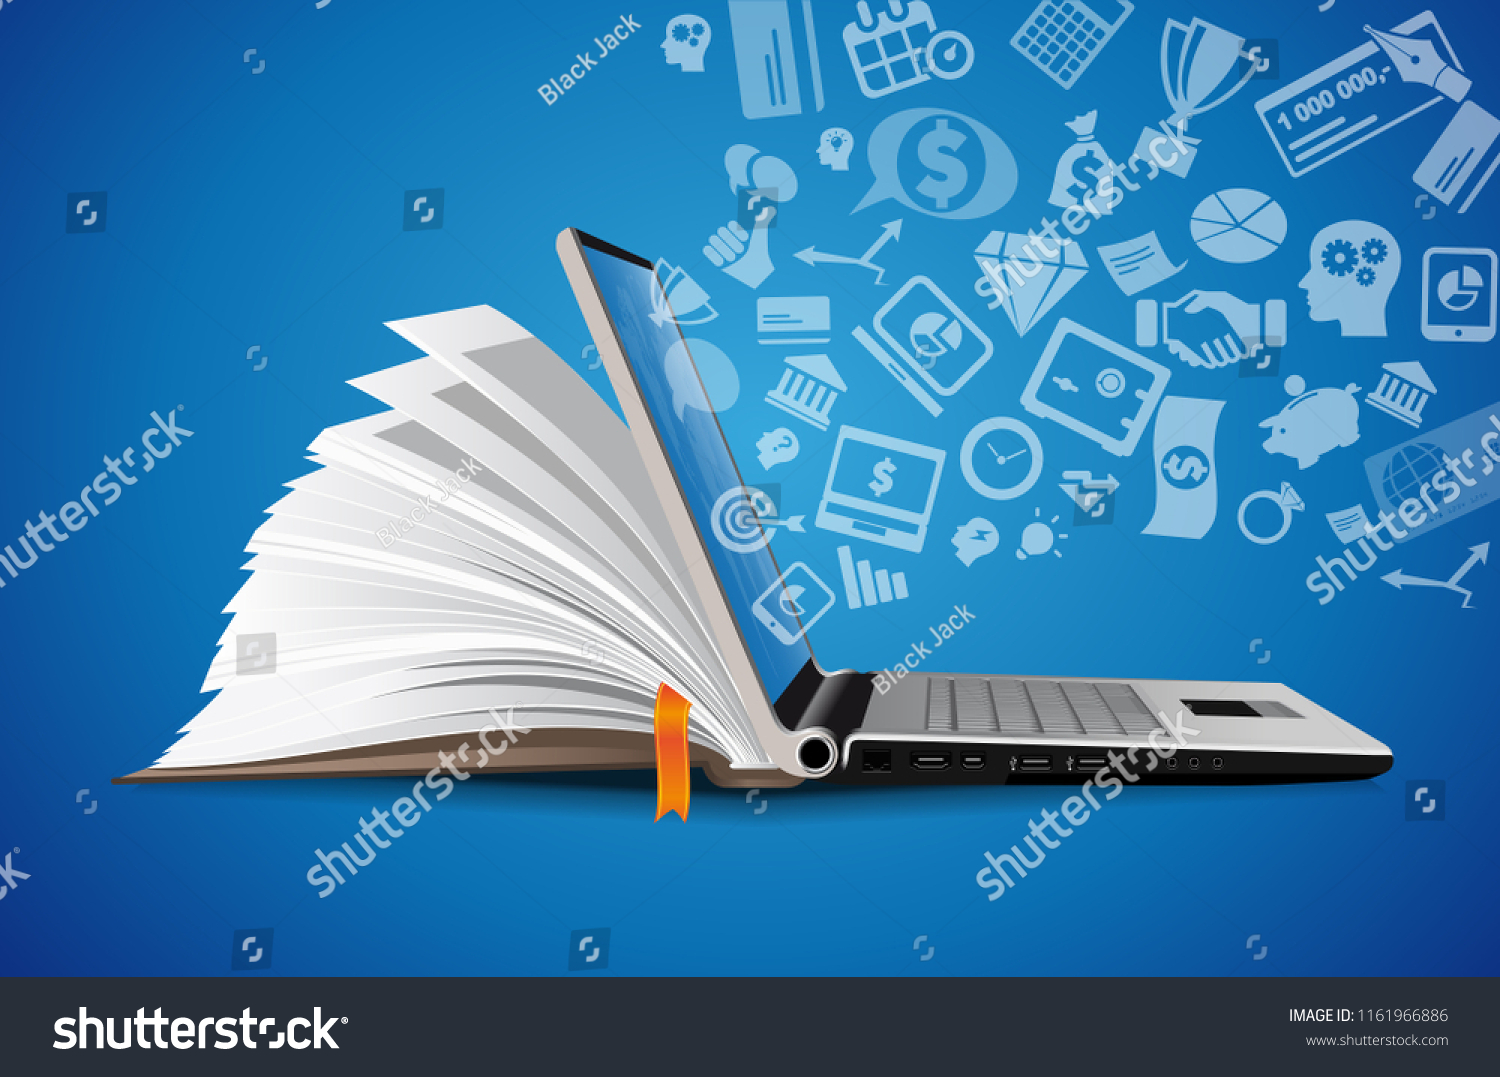 Computer as book knowledge base concept - laptop as elearning idea #1161966886